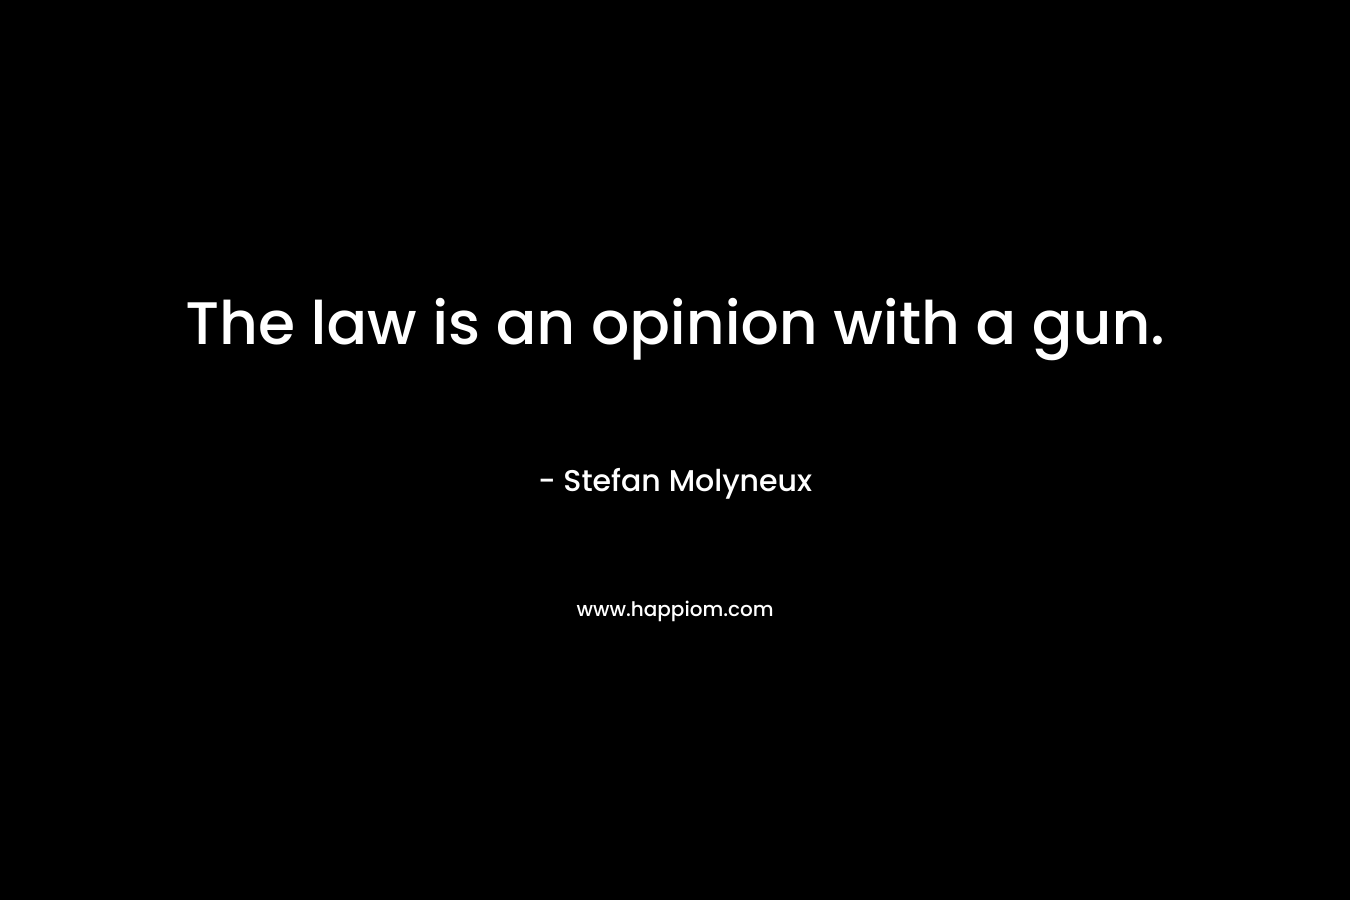 The law is an opinion with a gun.